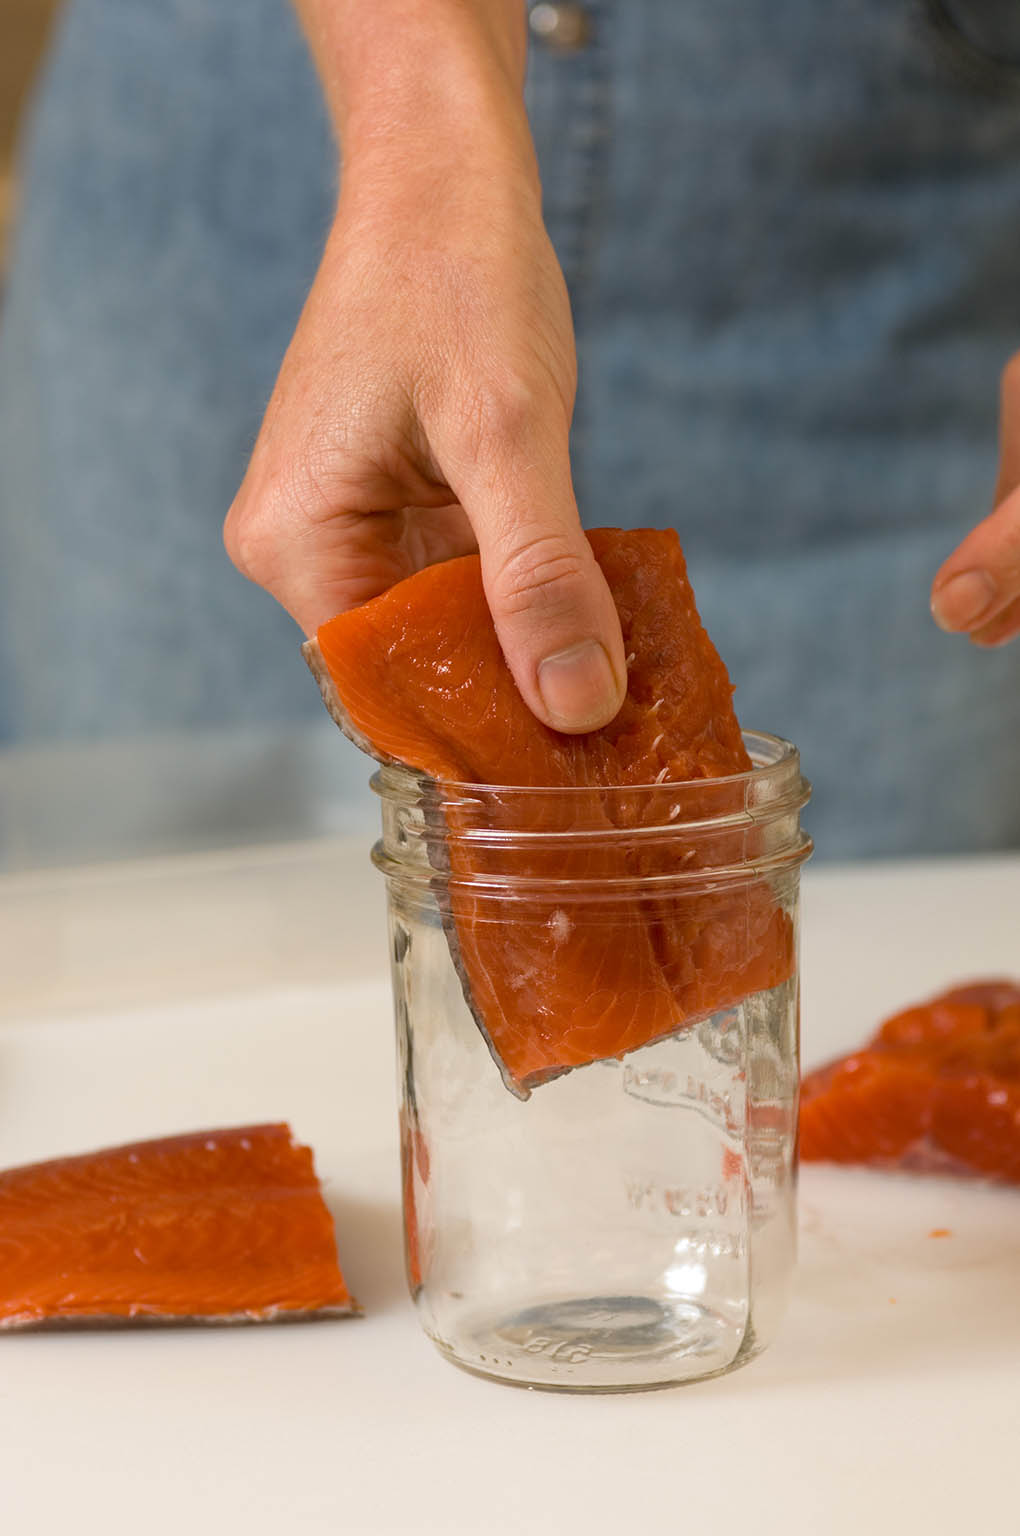 A person inserts a salmon fillet into a canning jar.